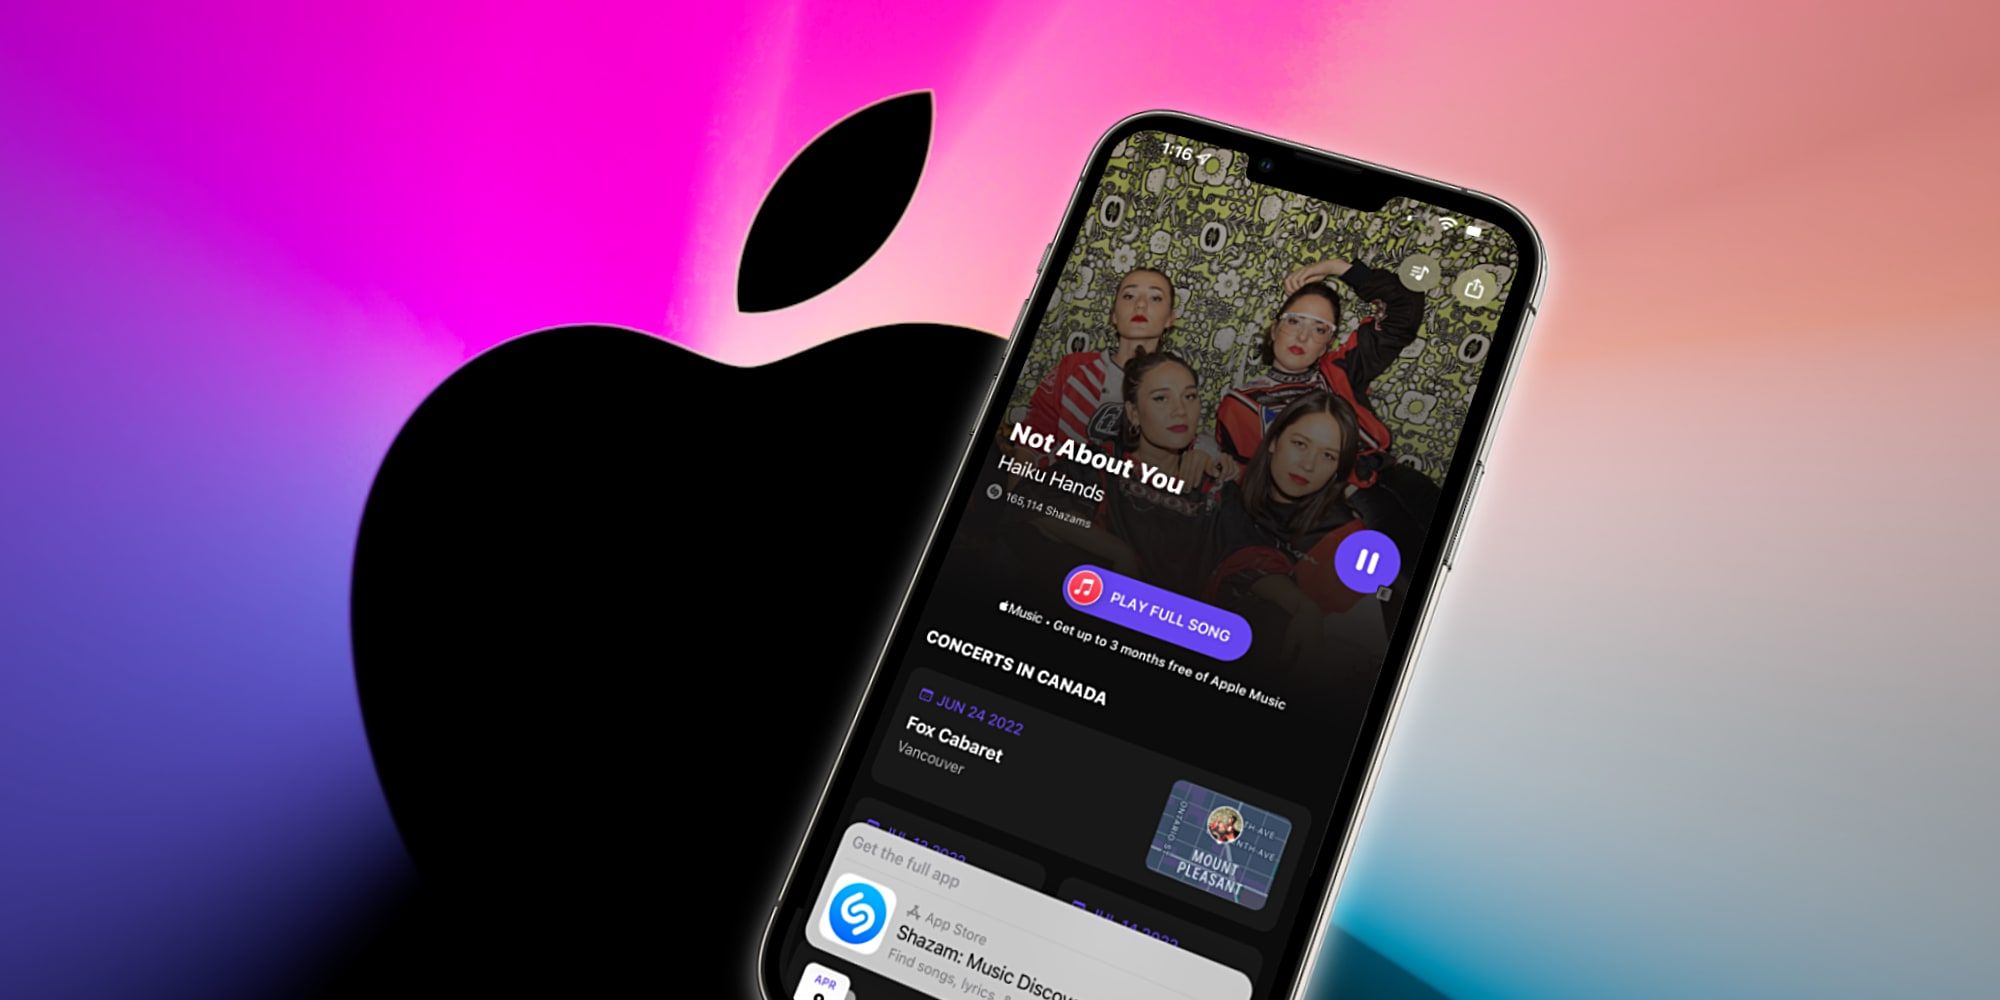 iPhone Shazam History: How To Find All The Songs You've Scanned